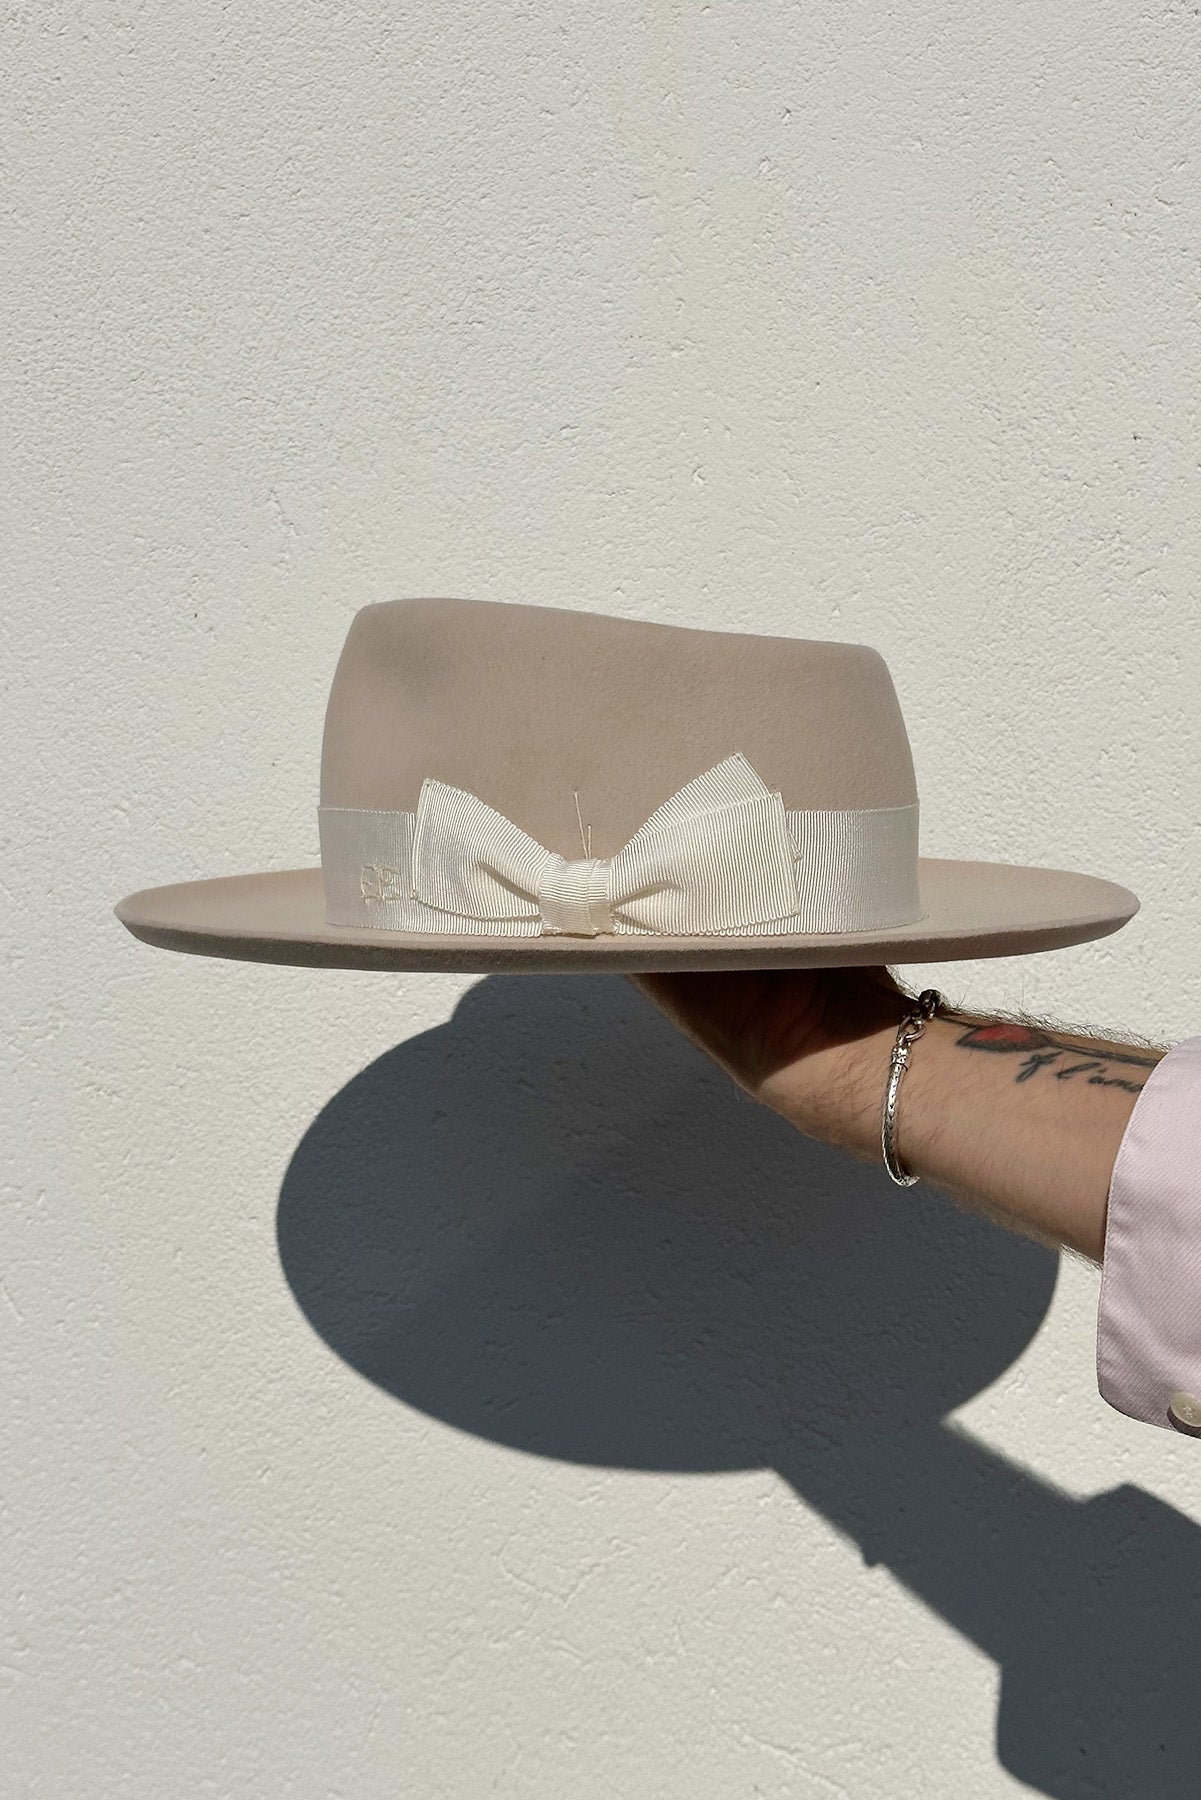 Unisex custom made fedora hat, handcrafted by SoonNoon in Stockholm